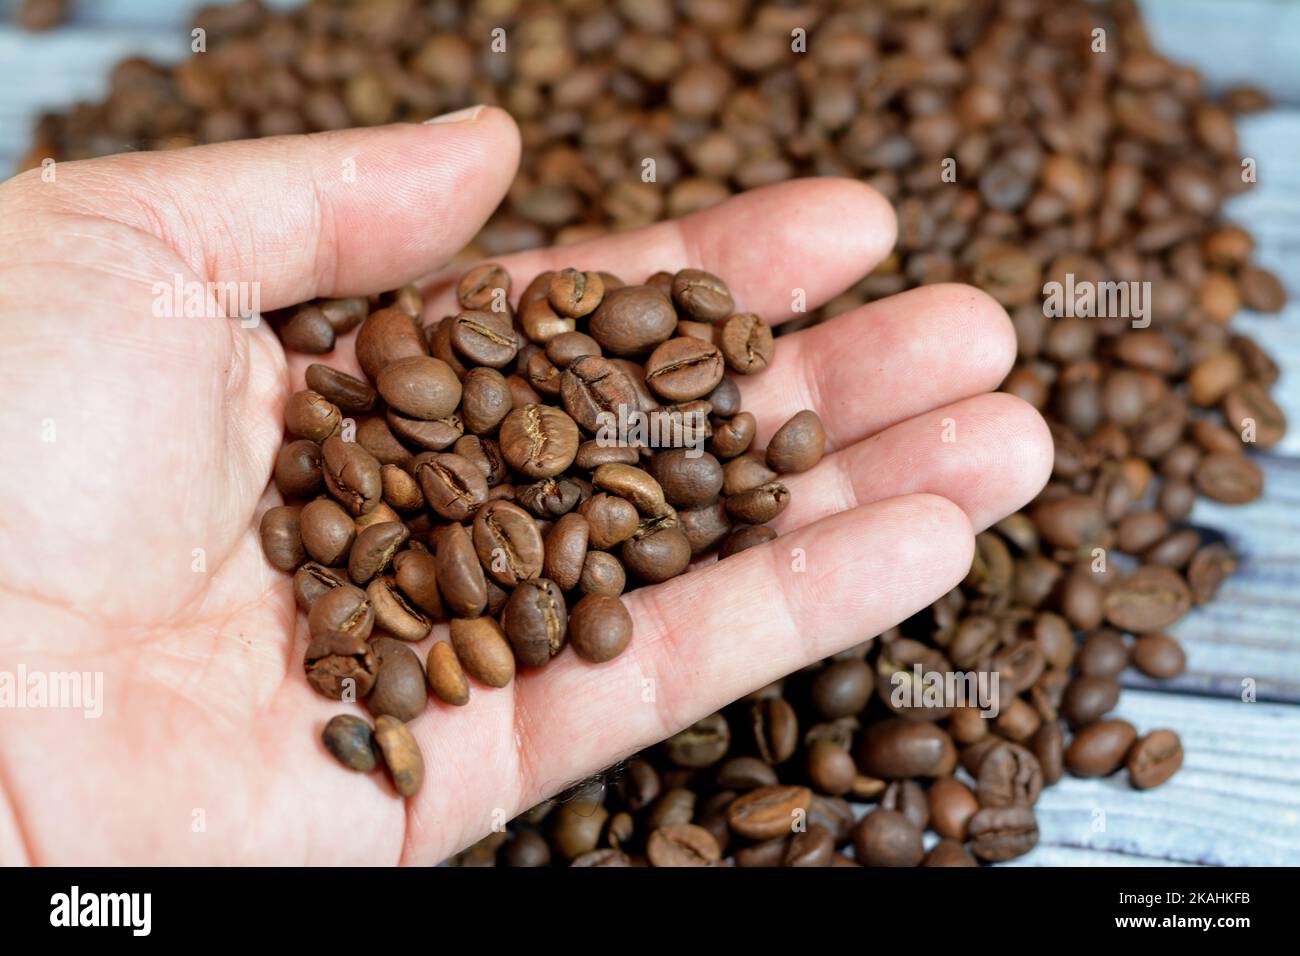 coffee beans, seeds of the Coffea plant and the source for coffee. It is the pip inside the red or purple fruit often referred to as a coffee cherry o Stock Photo